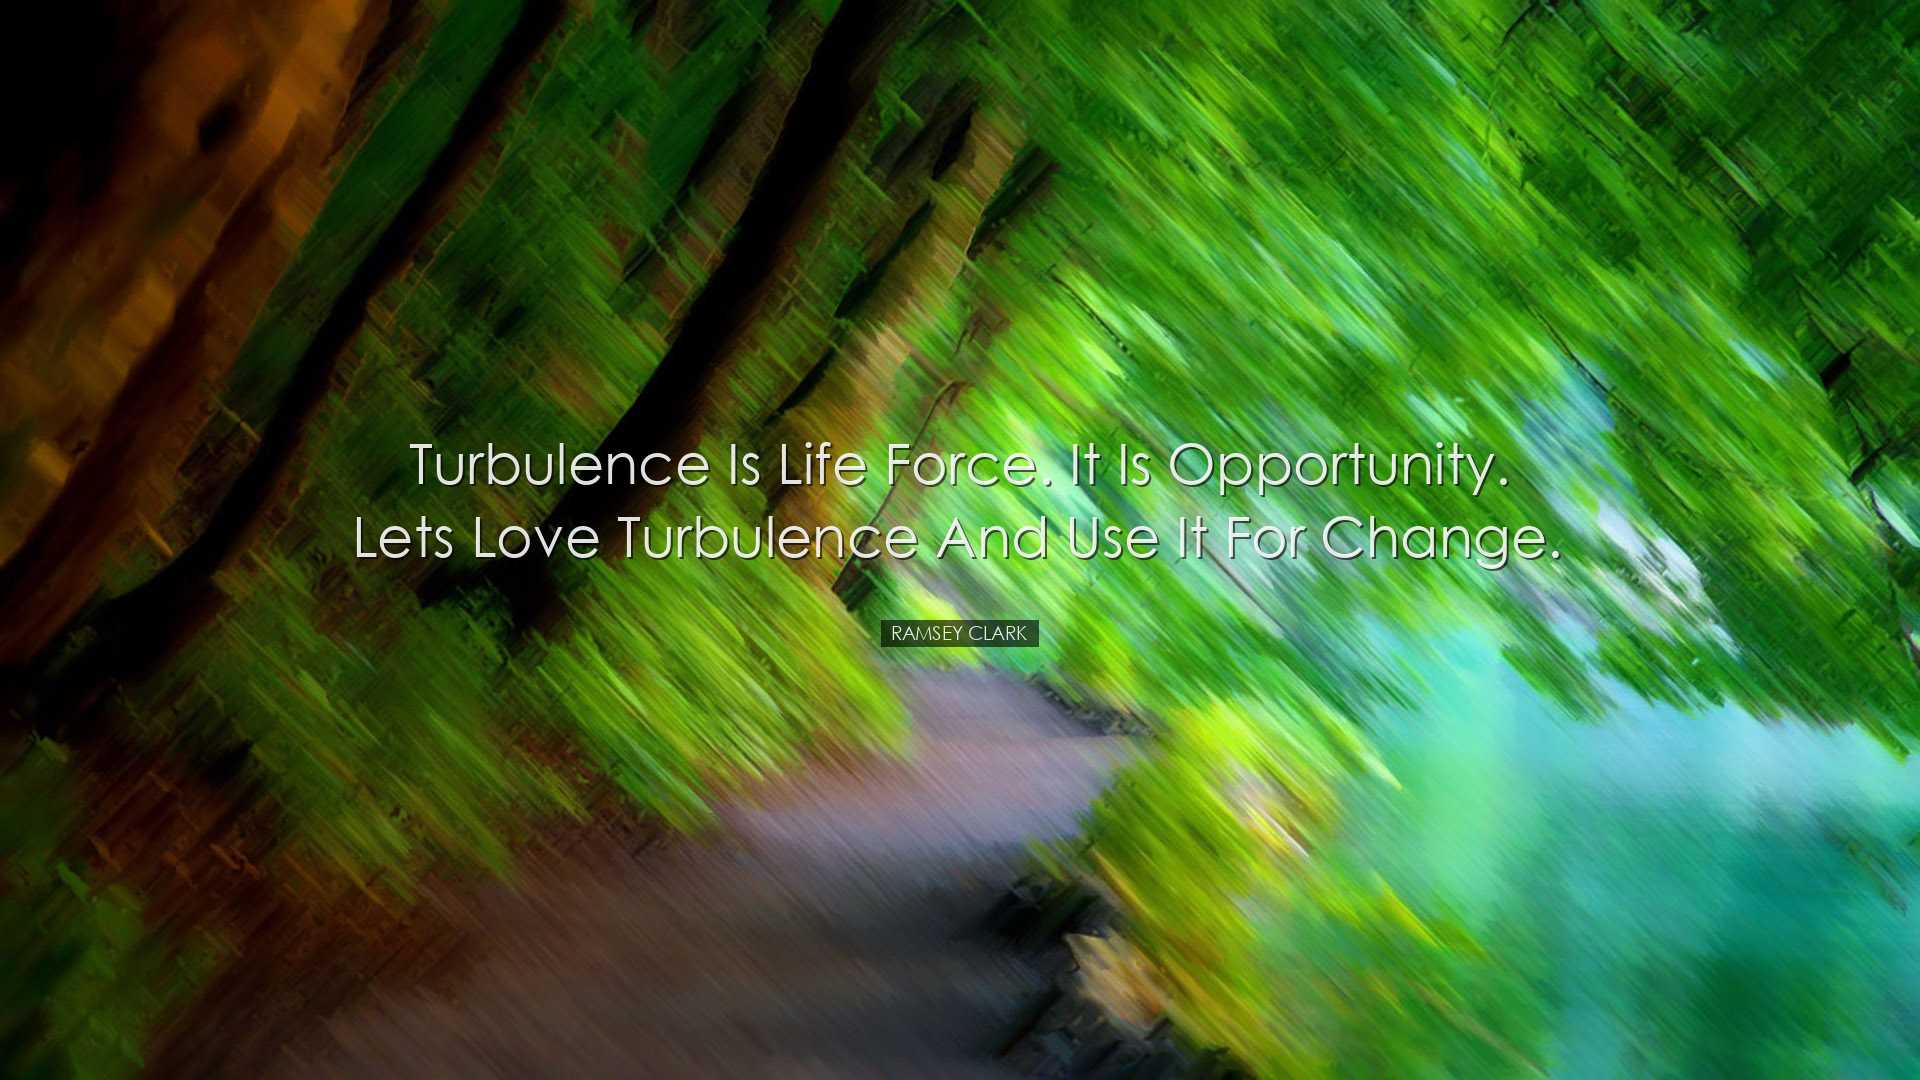 Turbulence is life force. It is opportunity. Lets love turbulence